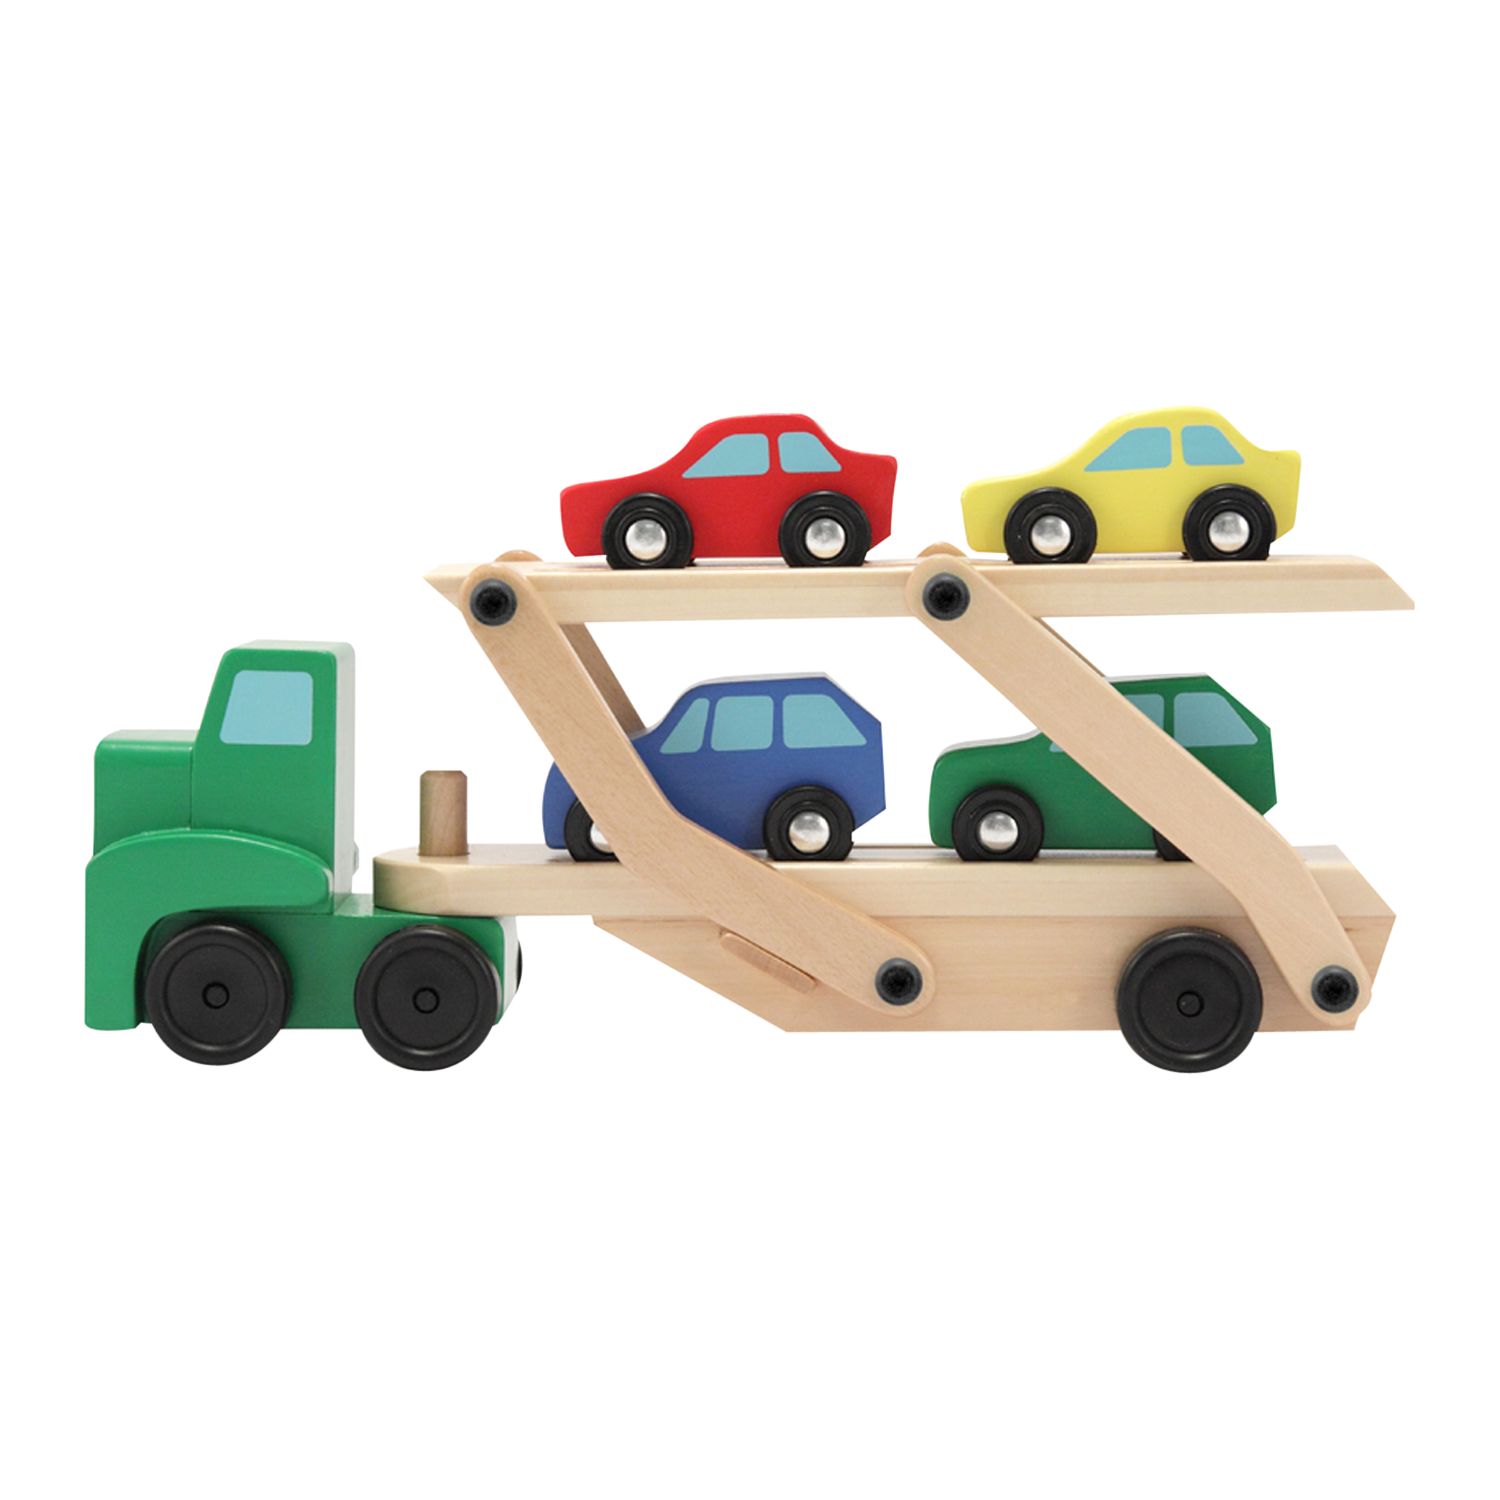 melissa and doug recycling truck